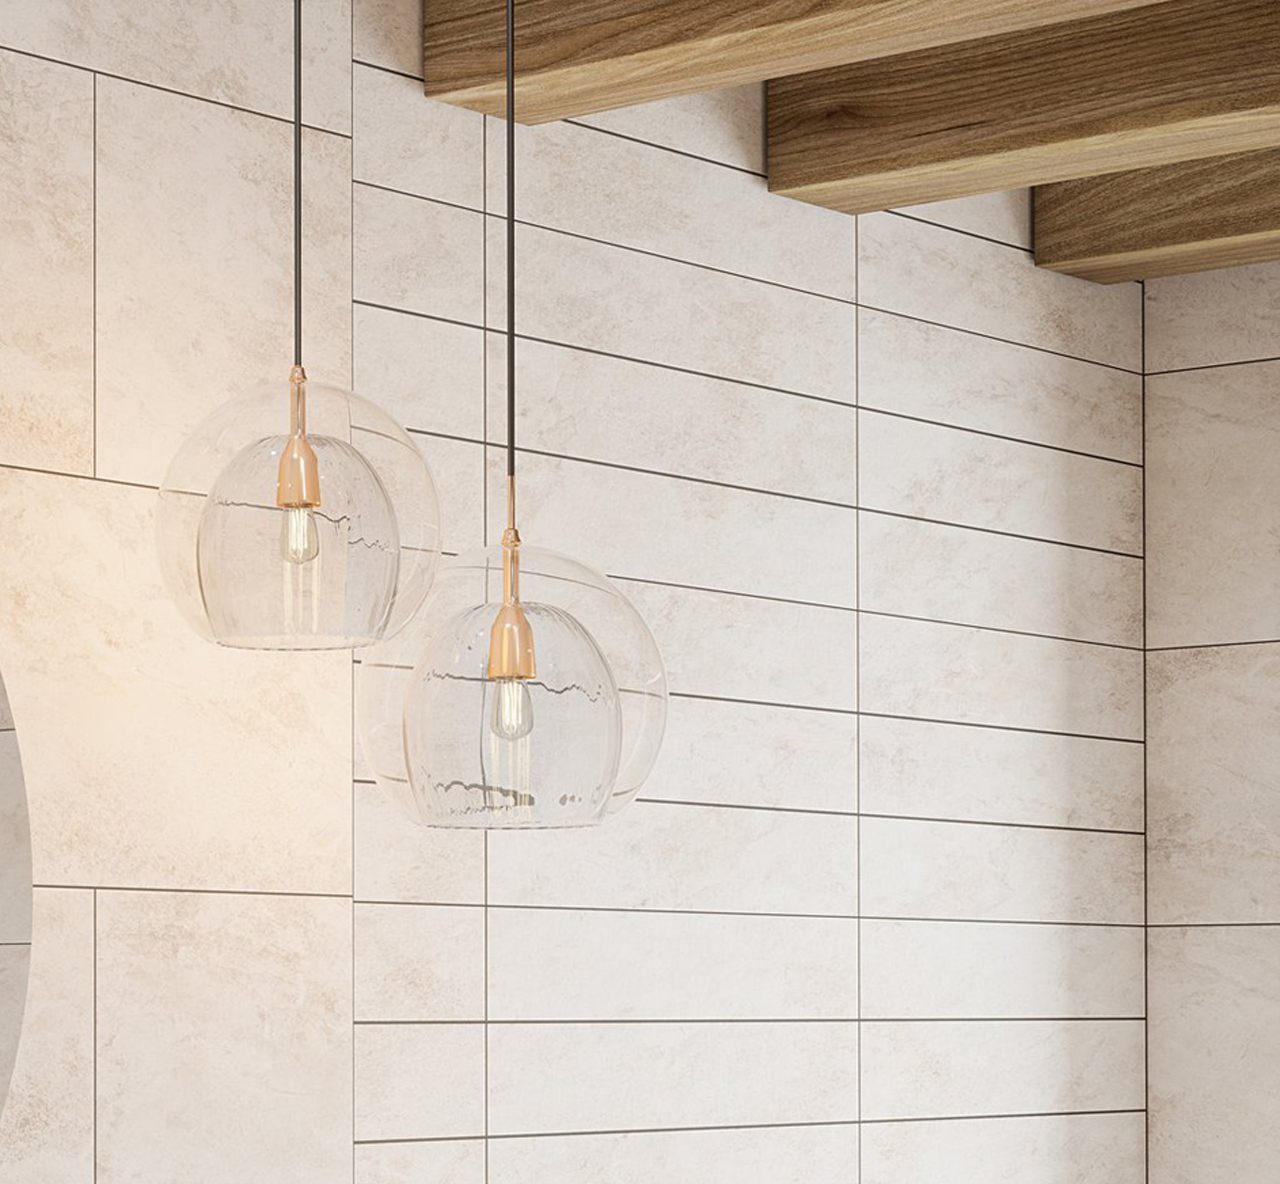 Johnsons Arlo Shale Once Scored Beige Wall Tiles used in a cream stone effect bathroom with hanging lights